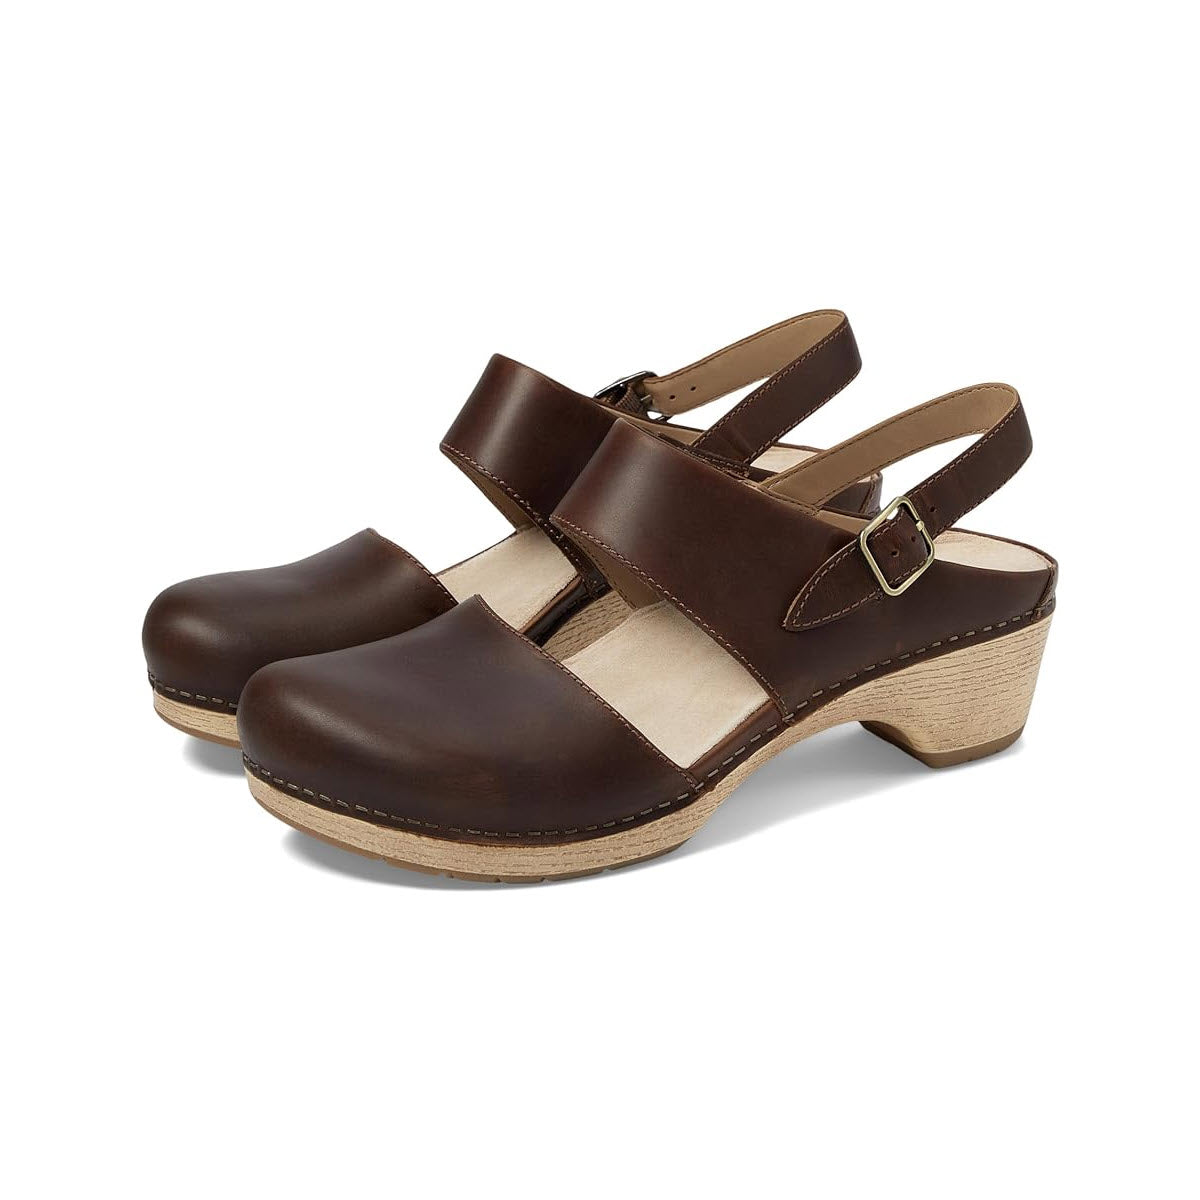 A pair of Dansko women&#39;s Lucia Tan leather sandals with an adjustable heel strap and wooden heels against a white background.